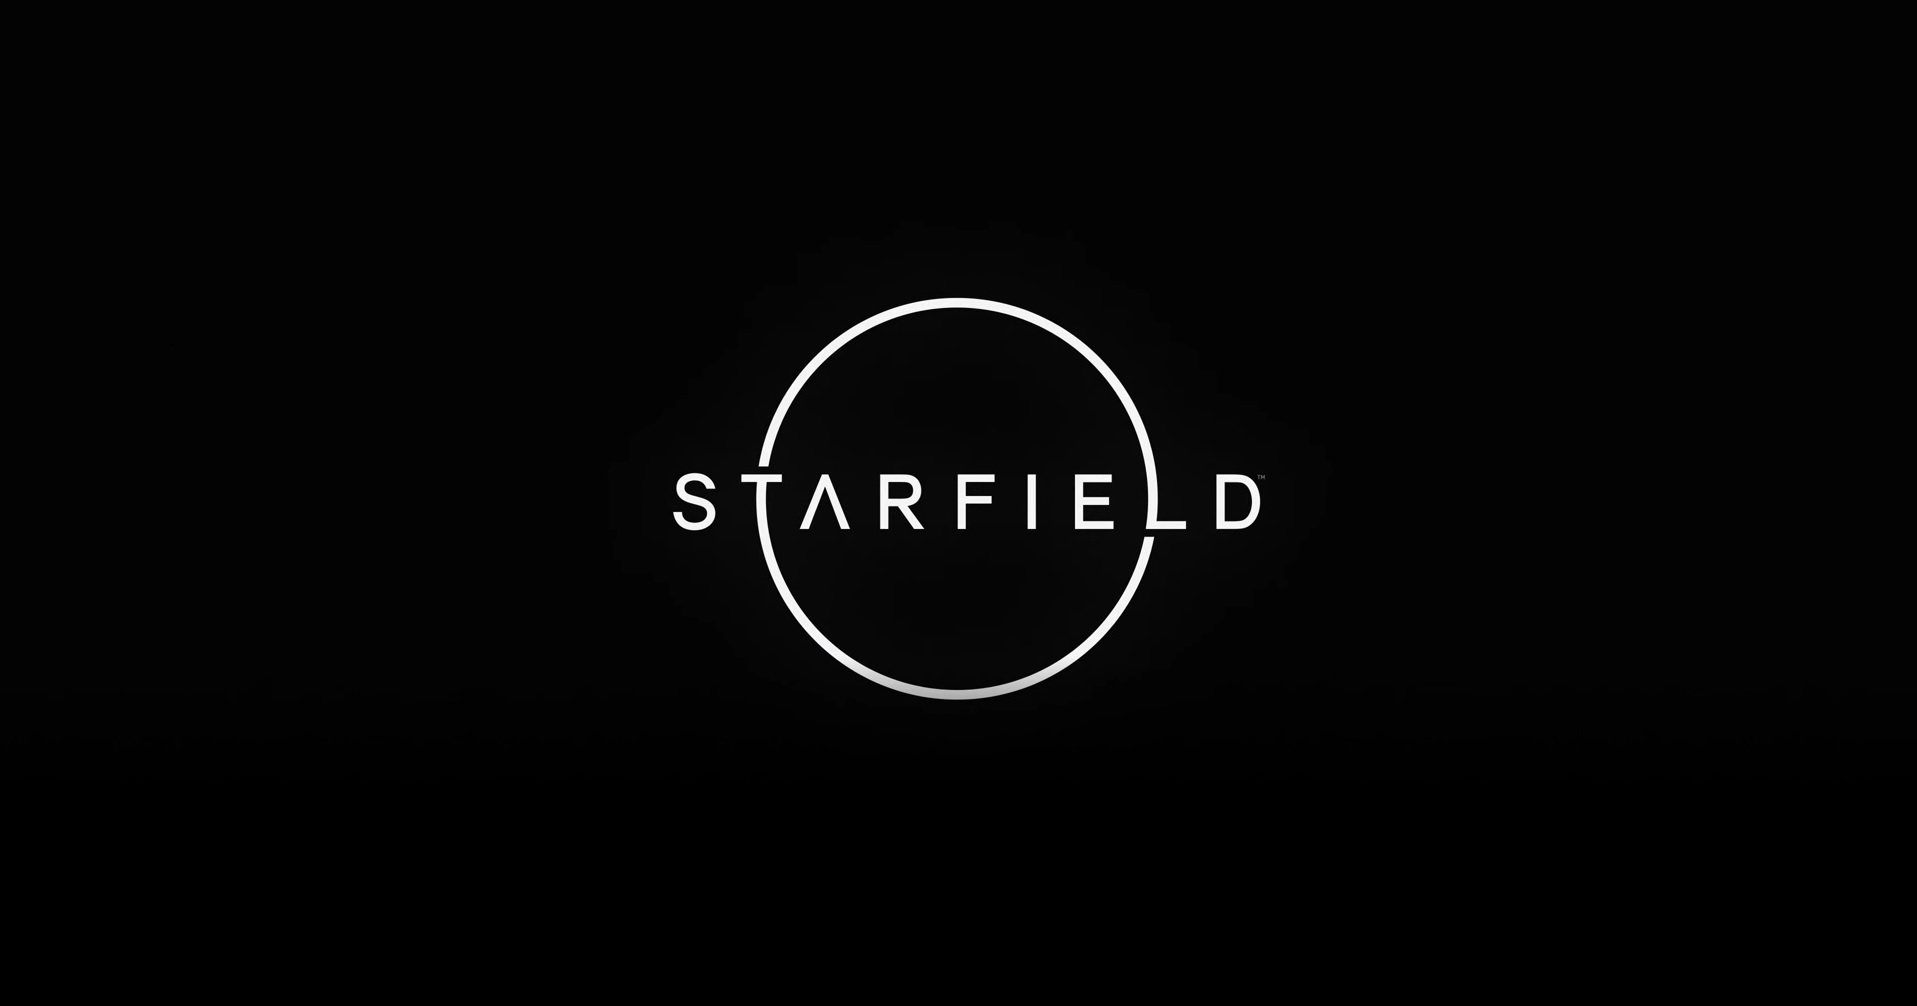 Xbox feared that Starfield would be exclusive to PS5, so they